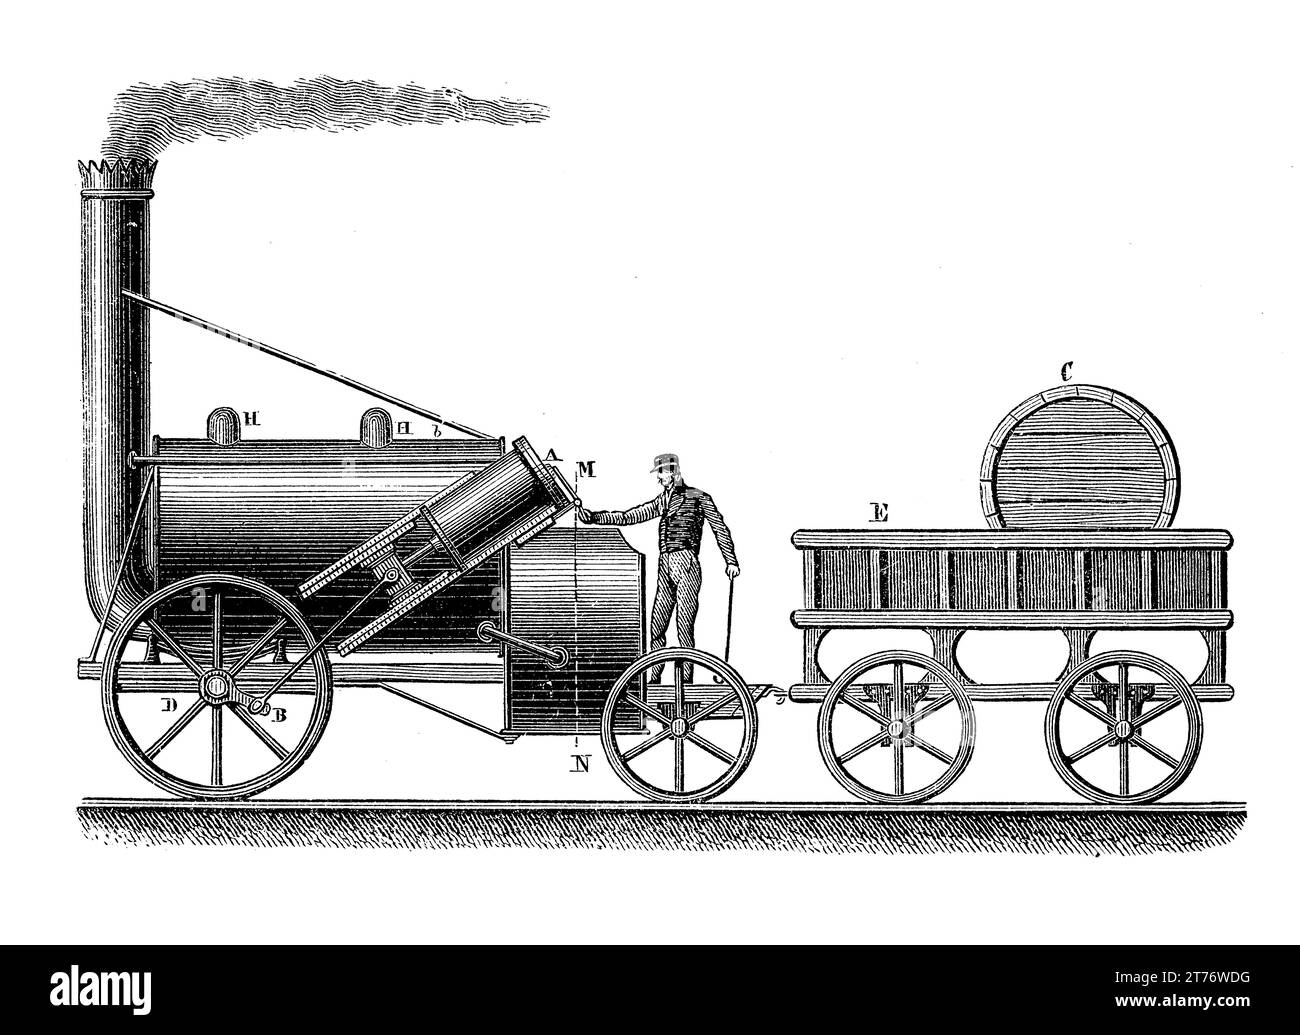 Stephenson's Rocket early steam locomotive for the  Liverpool and Manchester Railway designed and built by Robert Stephenson in 1829 Stock Photo